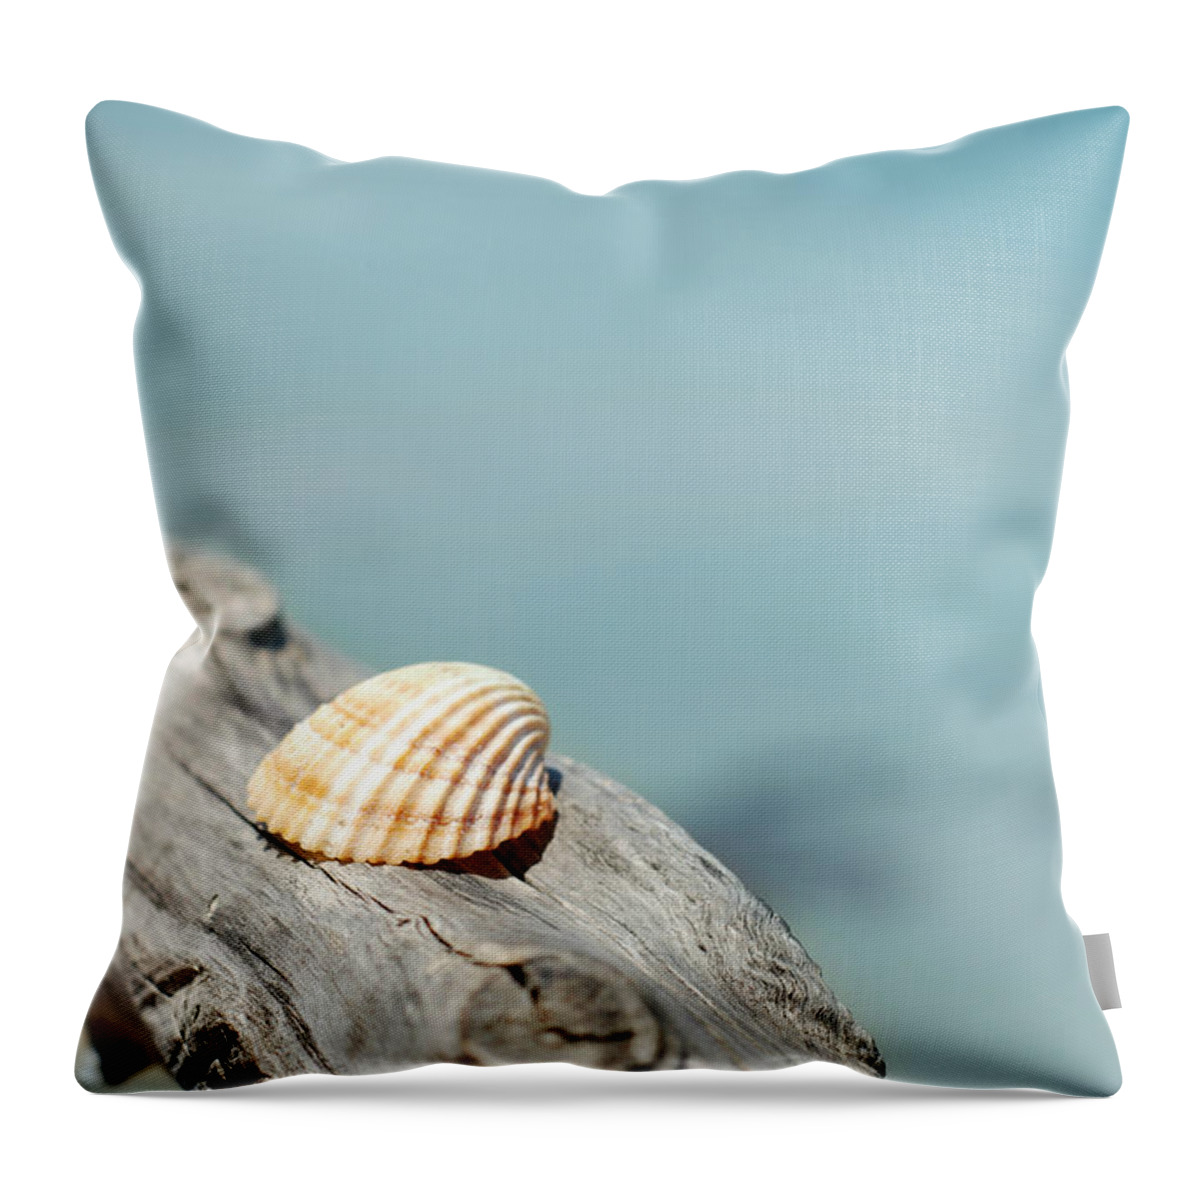 Tranquility Throw Pillow featuring the photograph Shell by Donatella Loi Photography